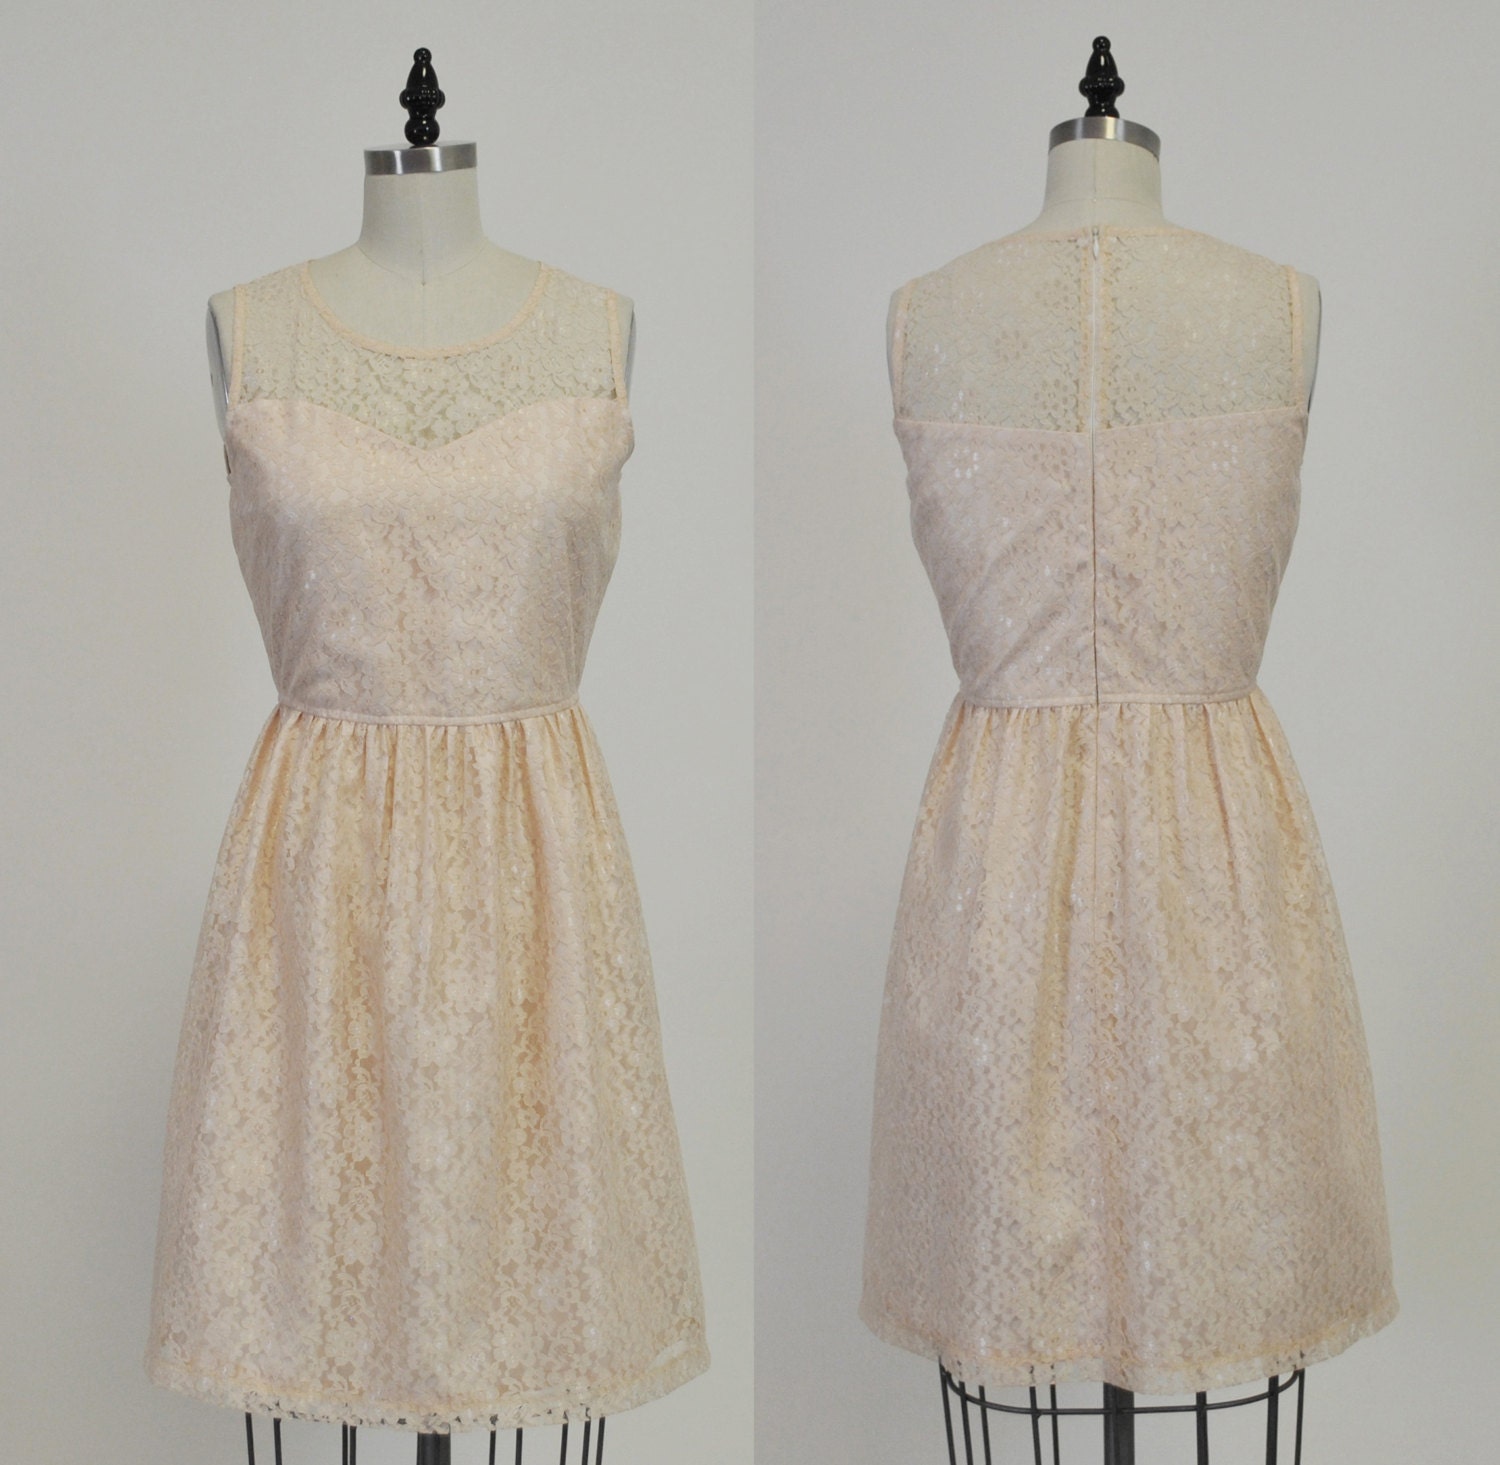 PROVENCE Champagne :Champagne lace dress sweetheart